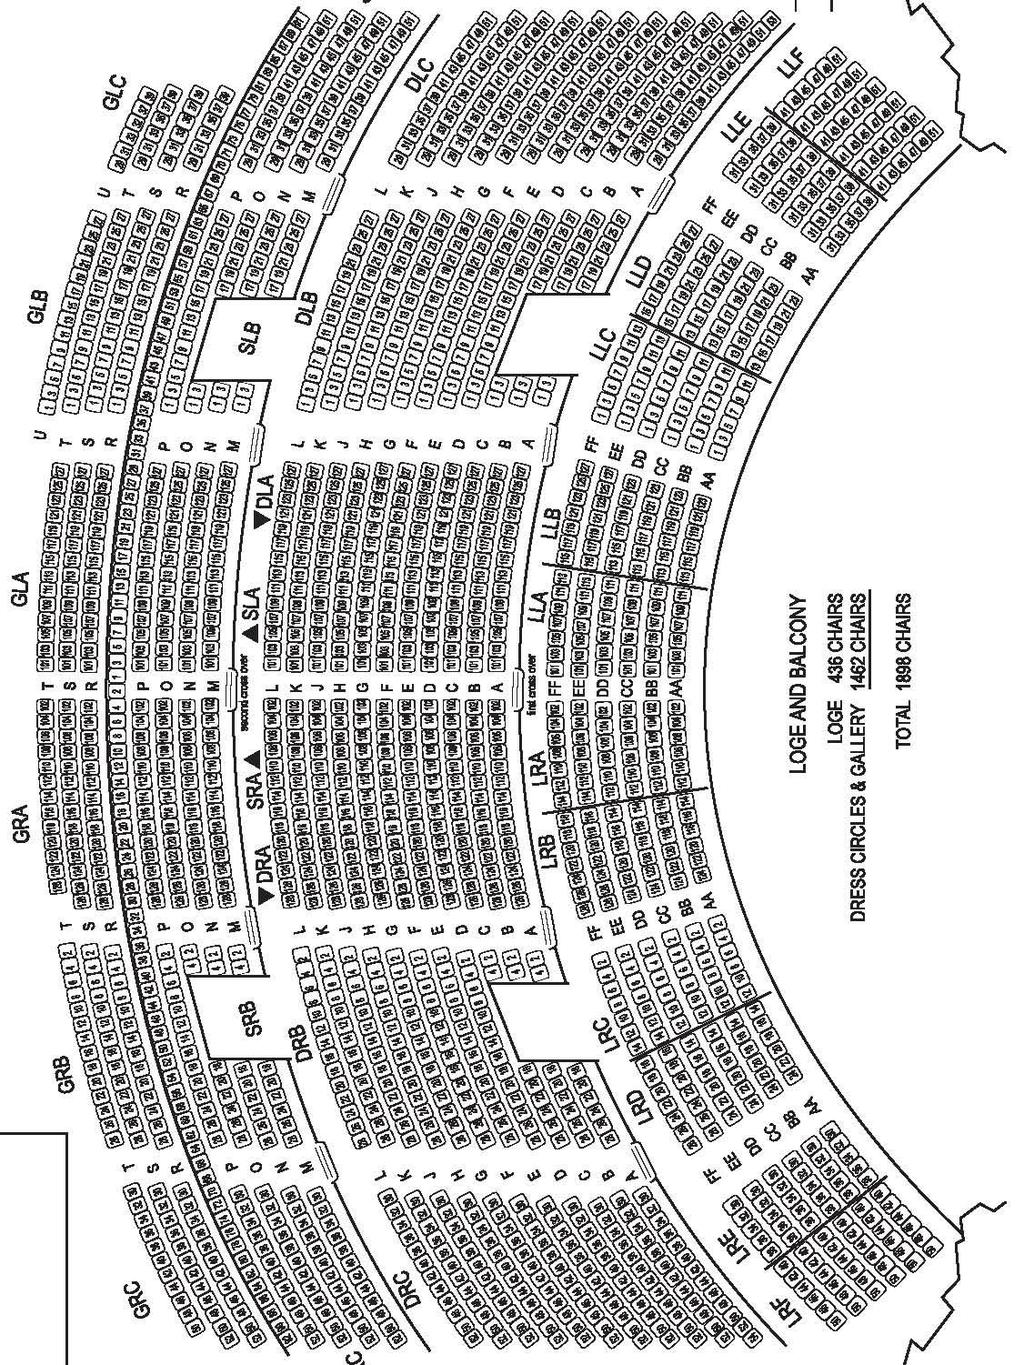 LOGE AND BALCONY LEVEL SEATING